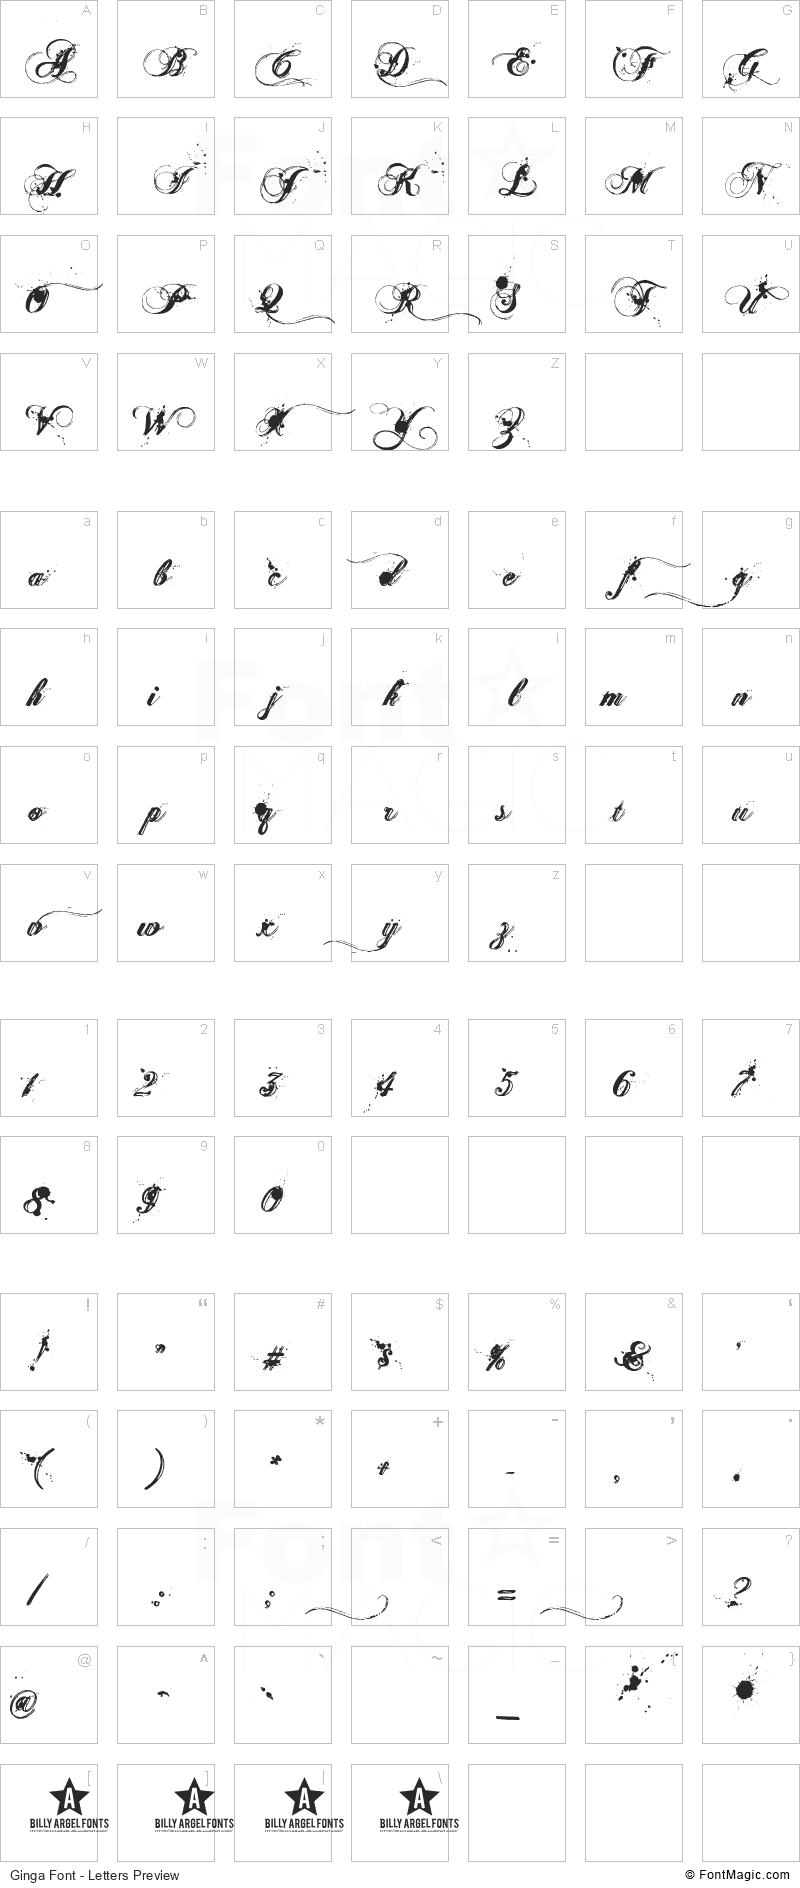 Ginga Font - All Latters Preview Chart